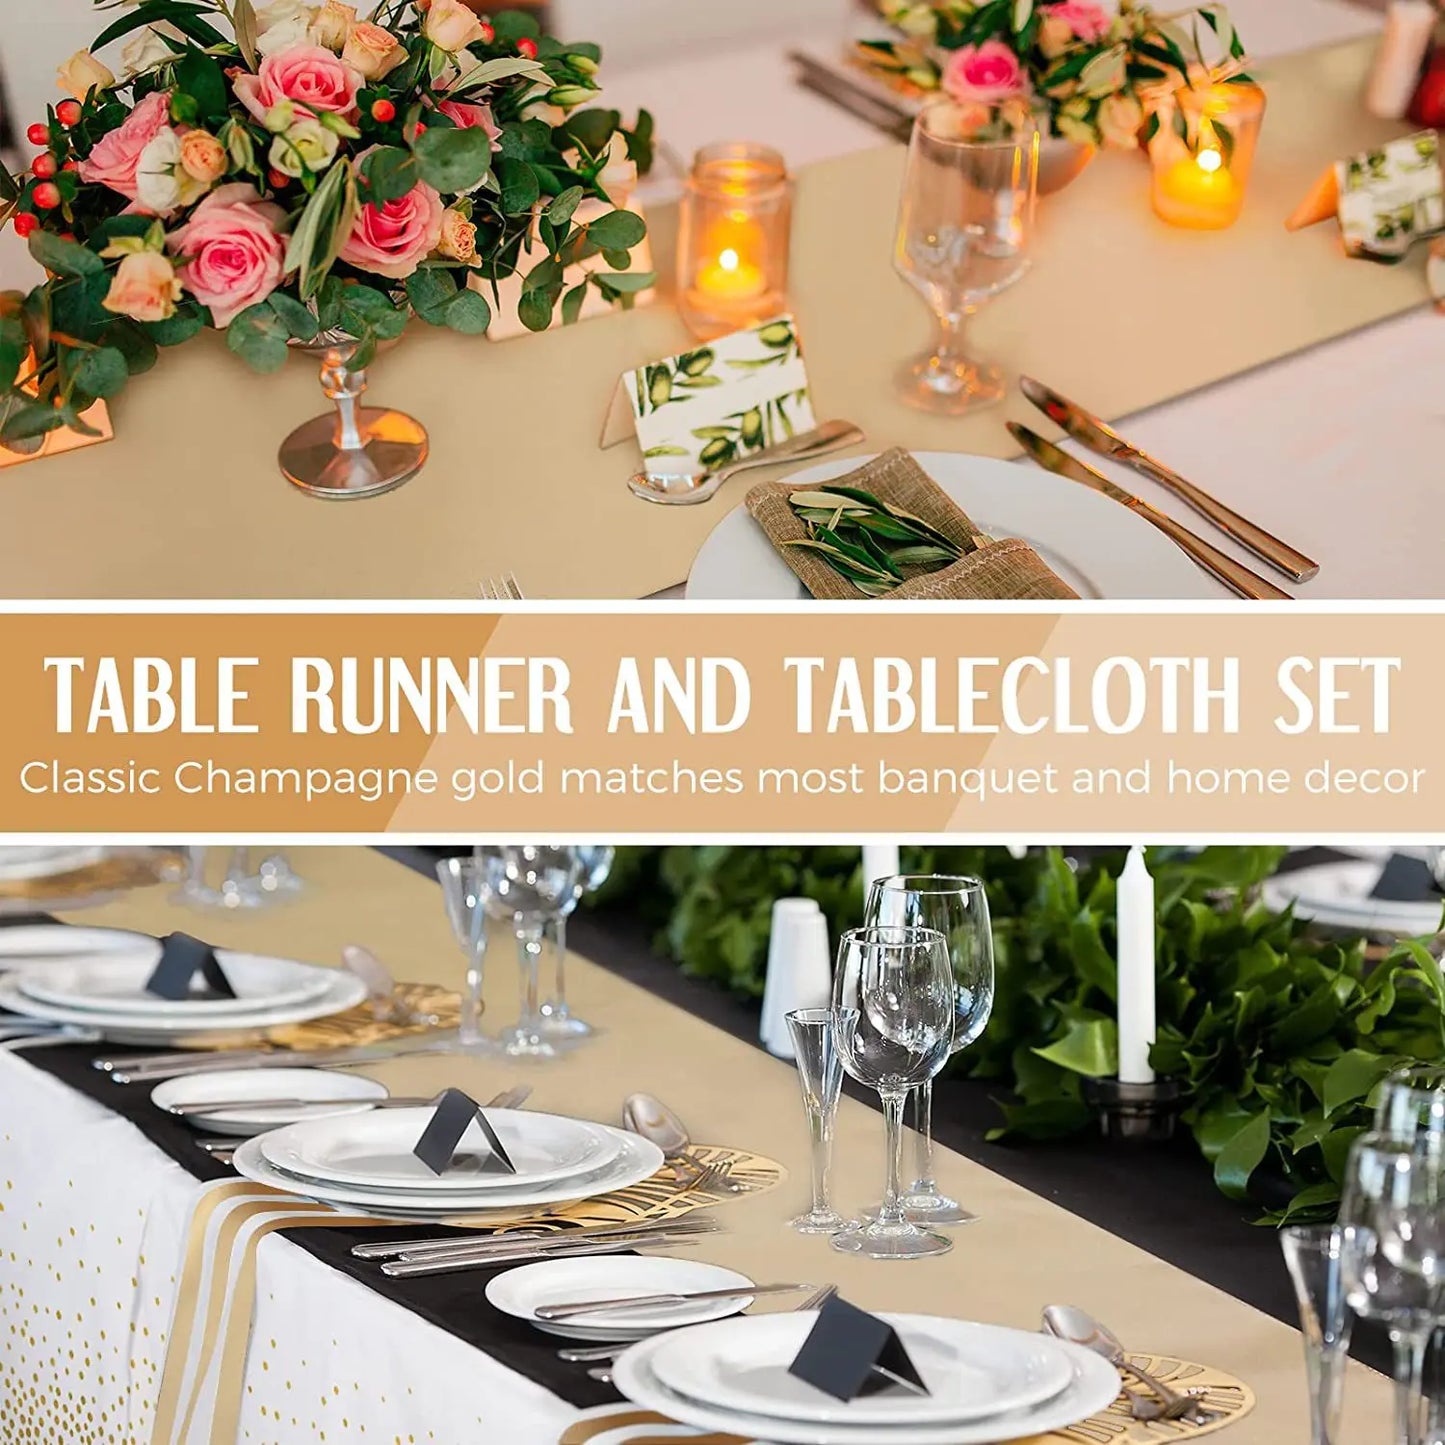 Disposable plastic tablecloth rose gold 6 seat  table cover 108 inches satin table runner for Wedding Party